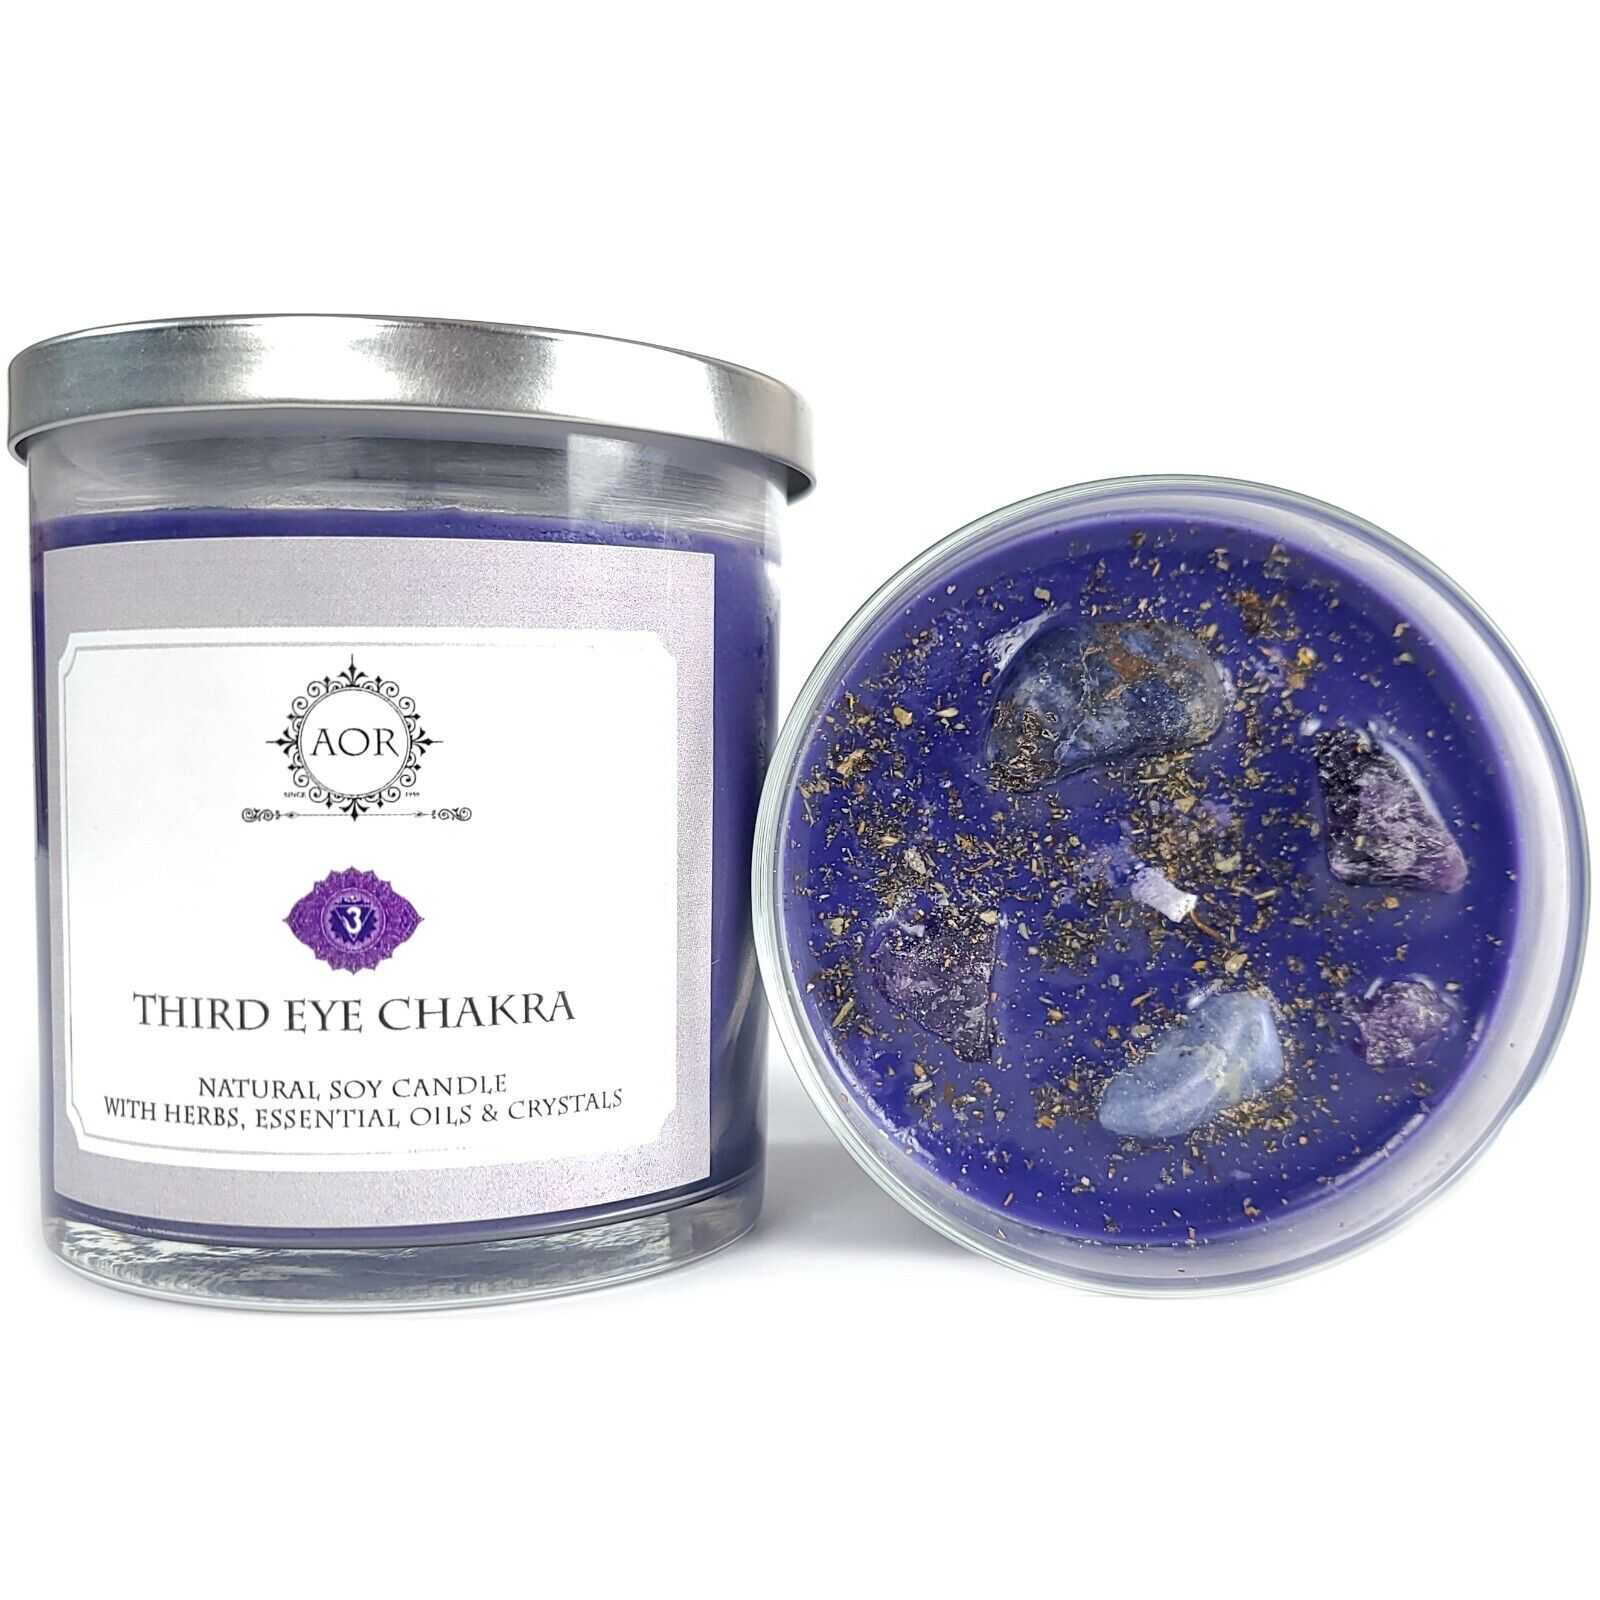 Third Eye Soy Chakra Candle W/ Crystals Herbs Yoga Magick Grounding Wiccan Pagan